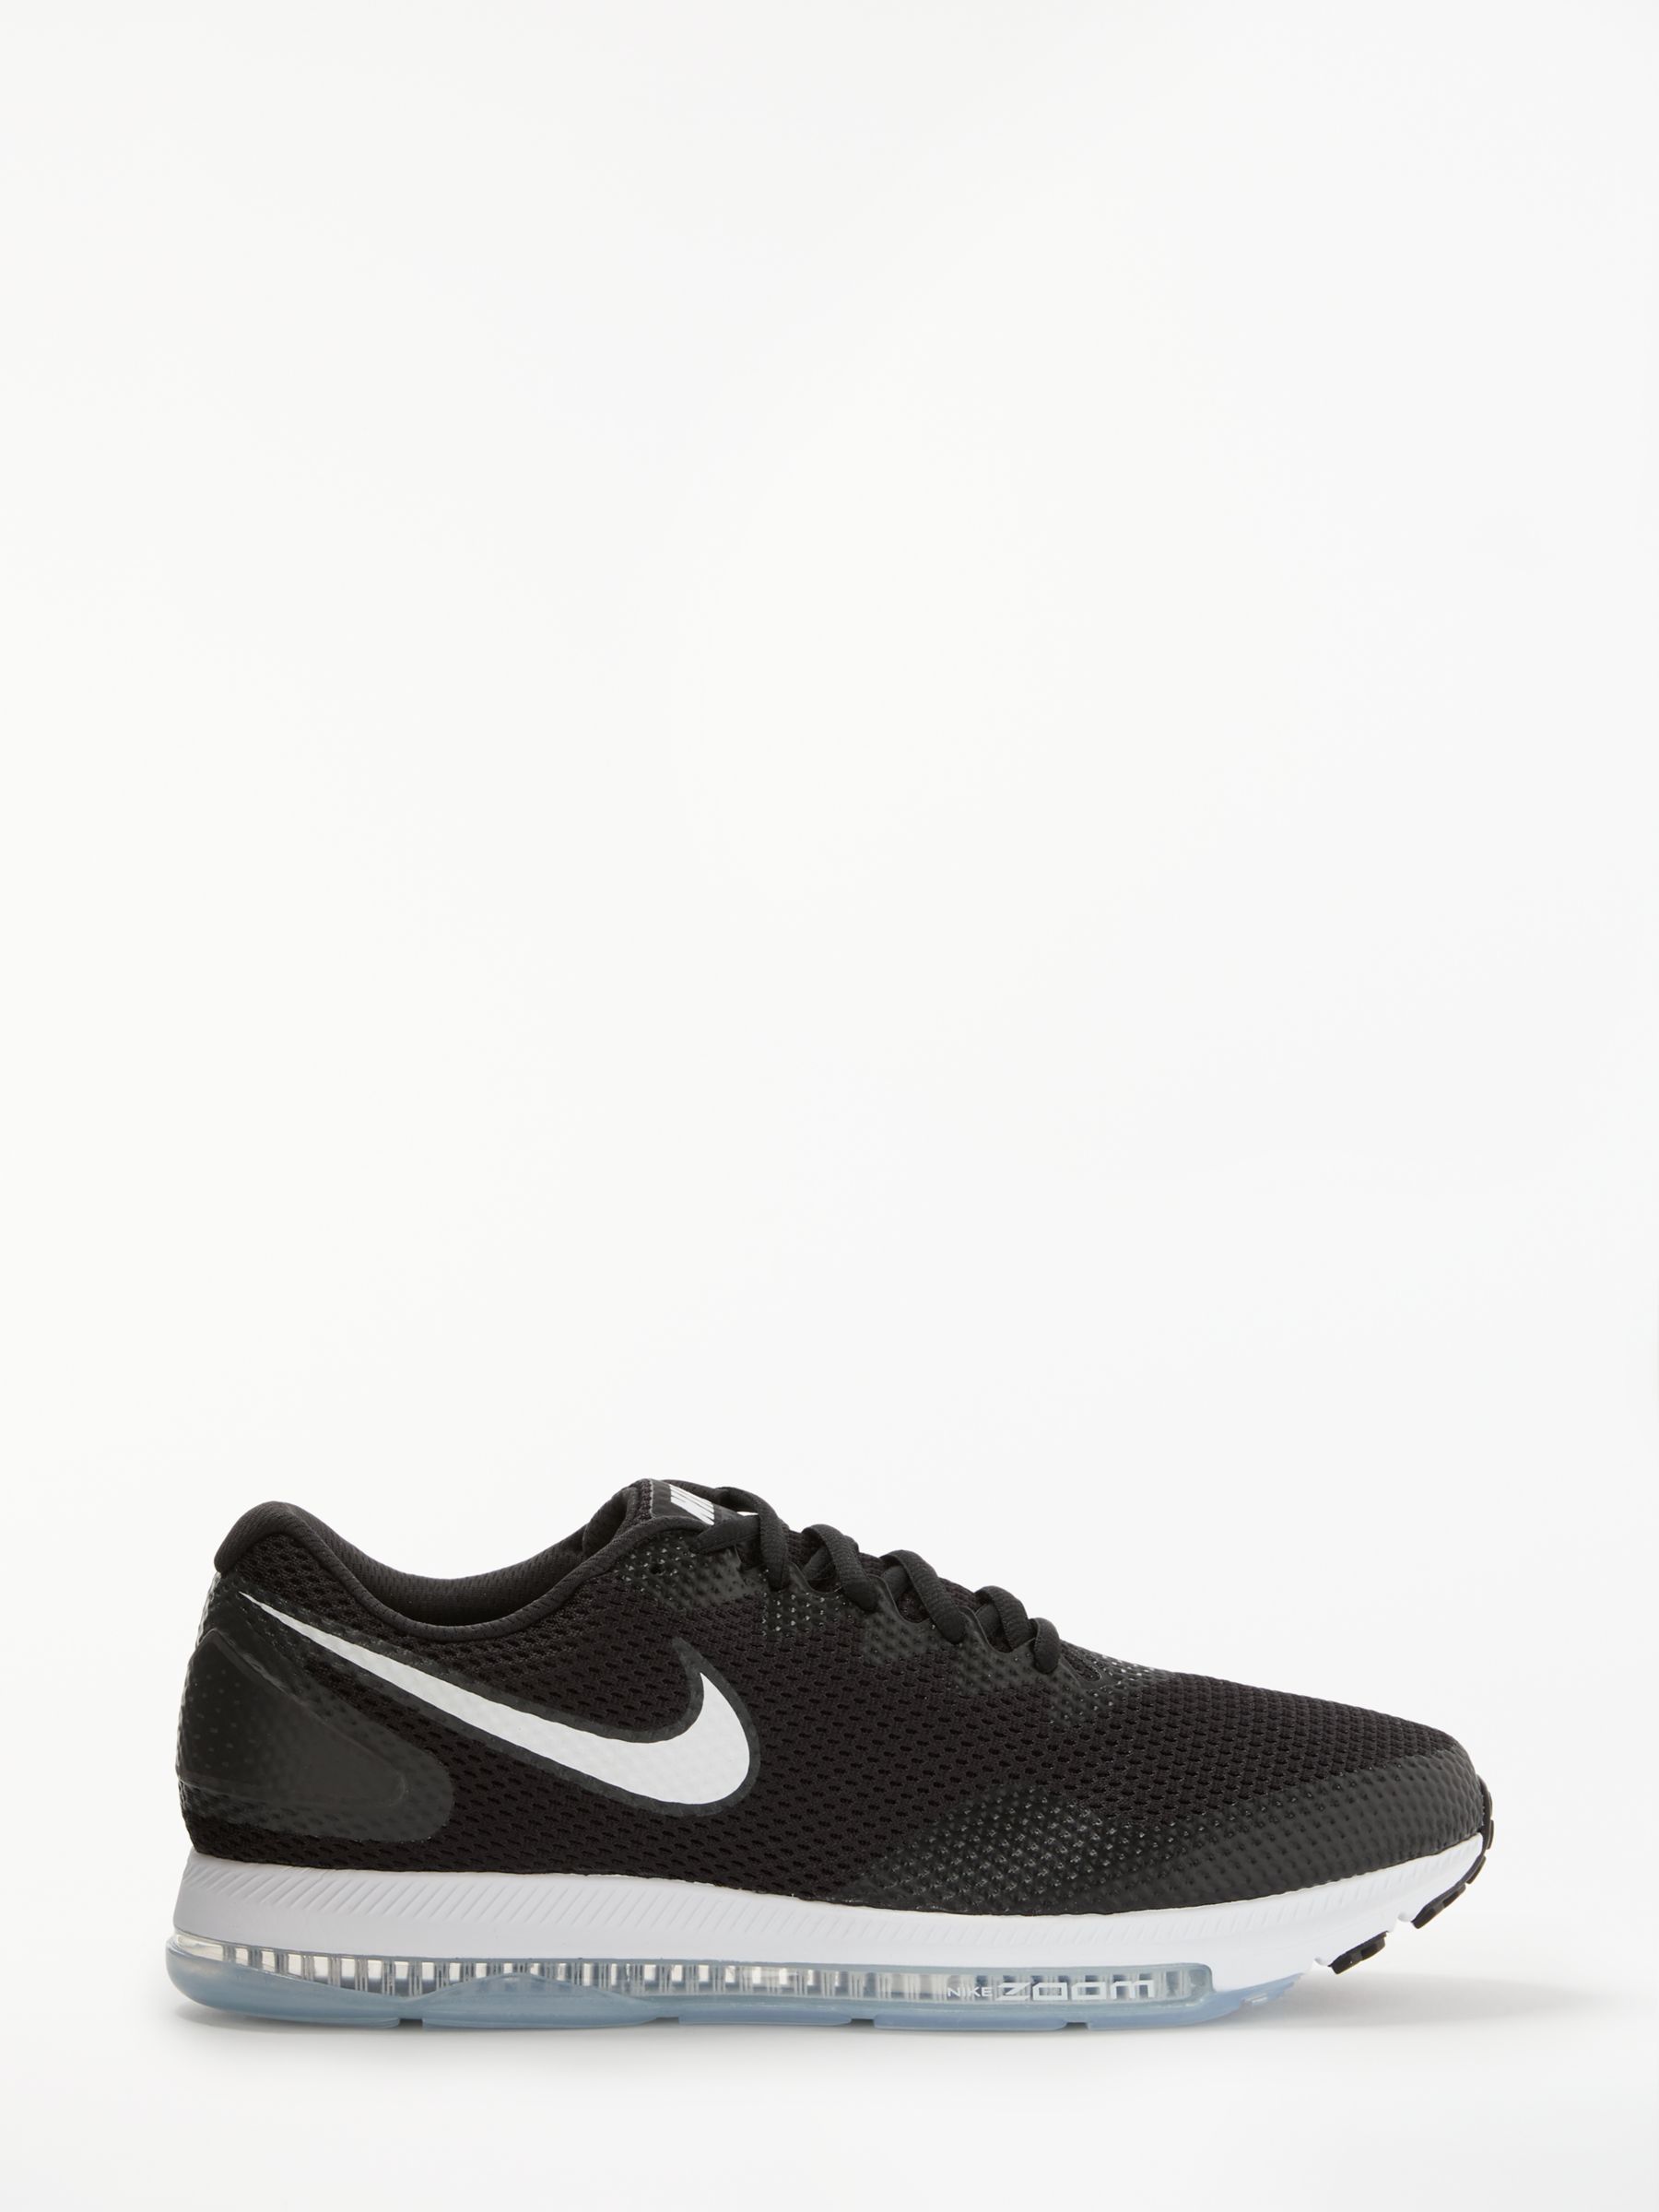 nike zoom all out low 2 mens